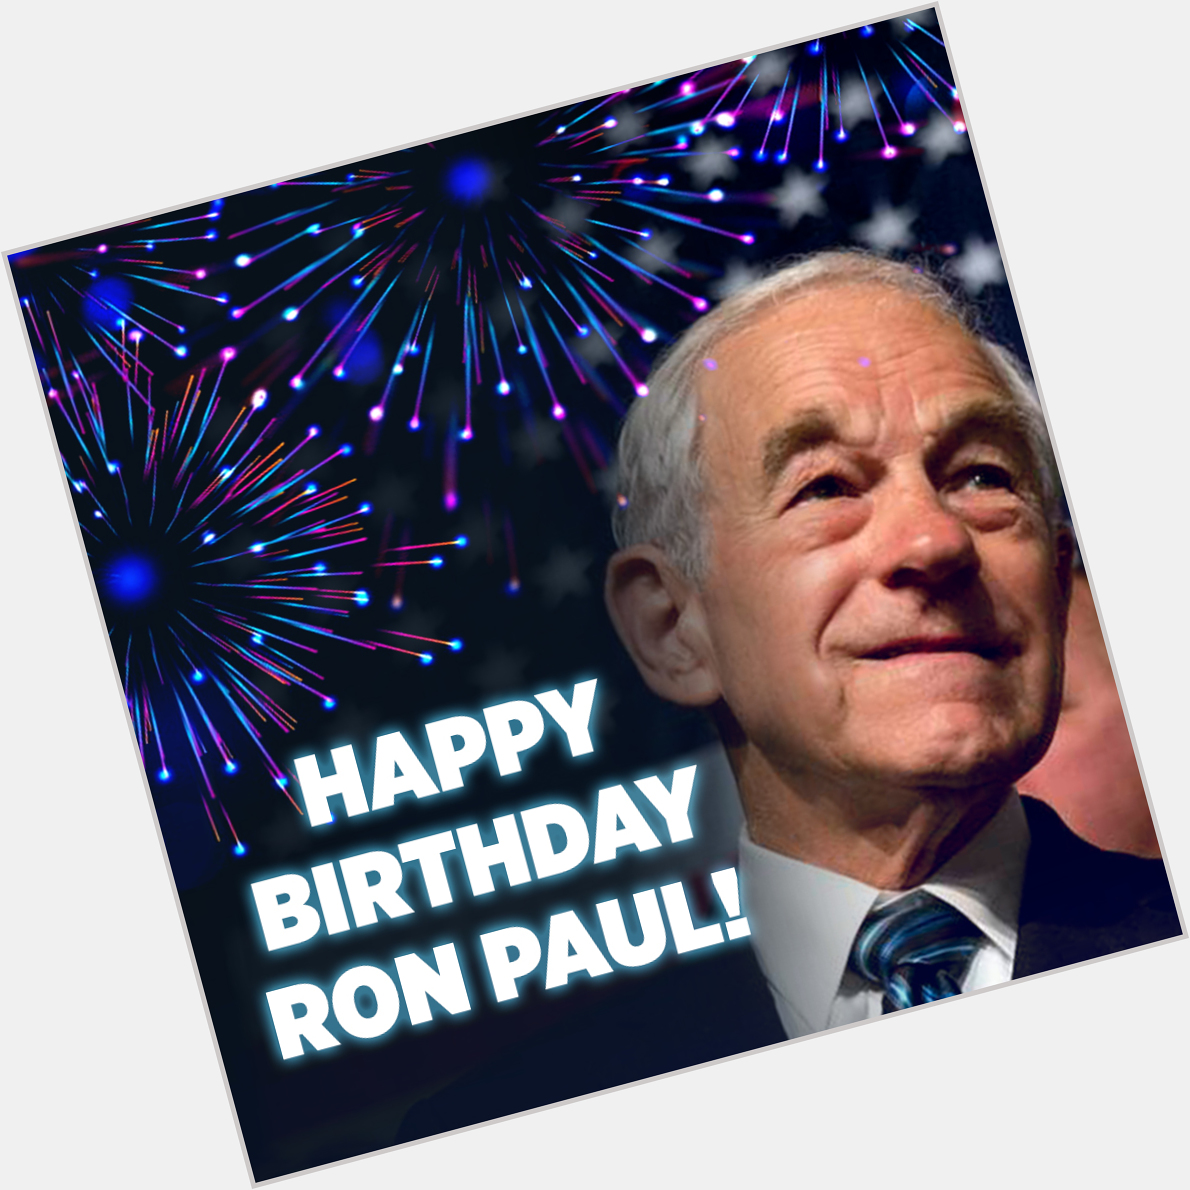 All of us at would like to wish a very Happy Birthday to Ron Paul! 